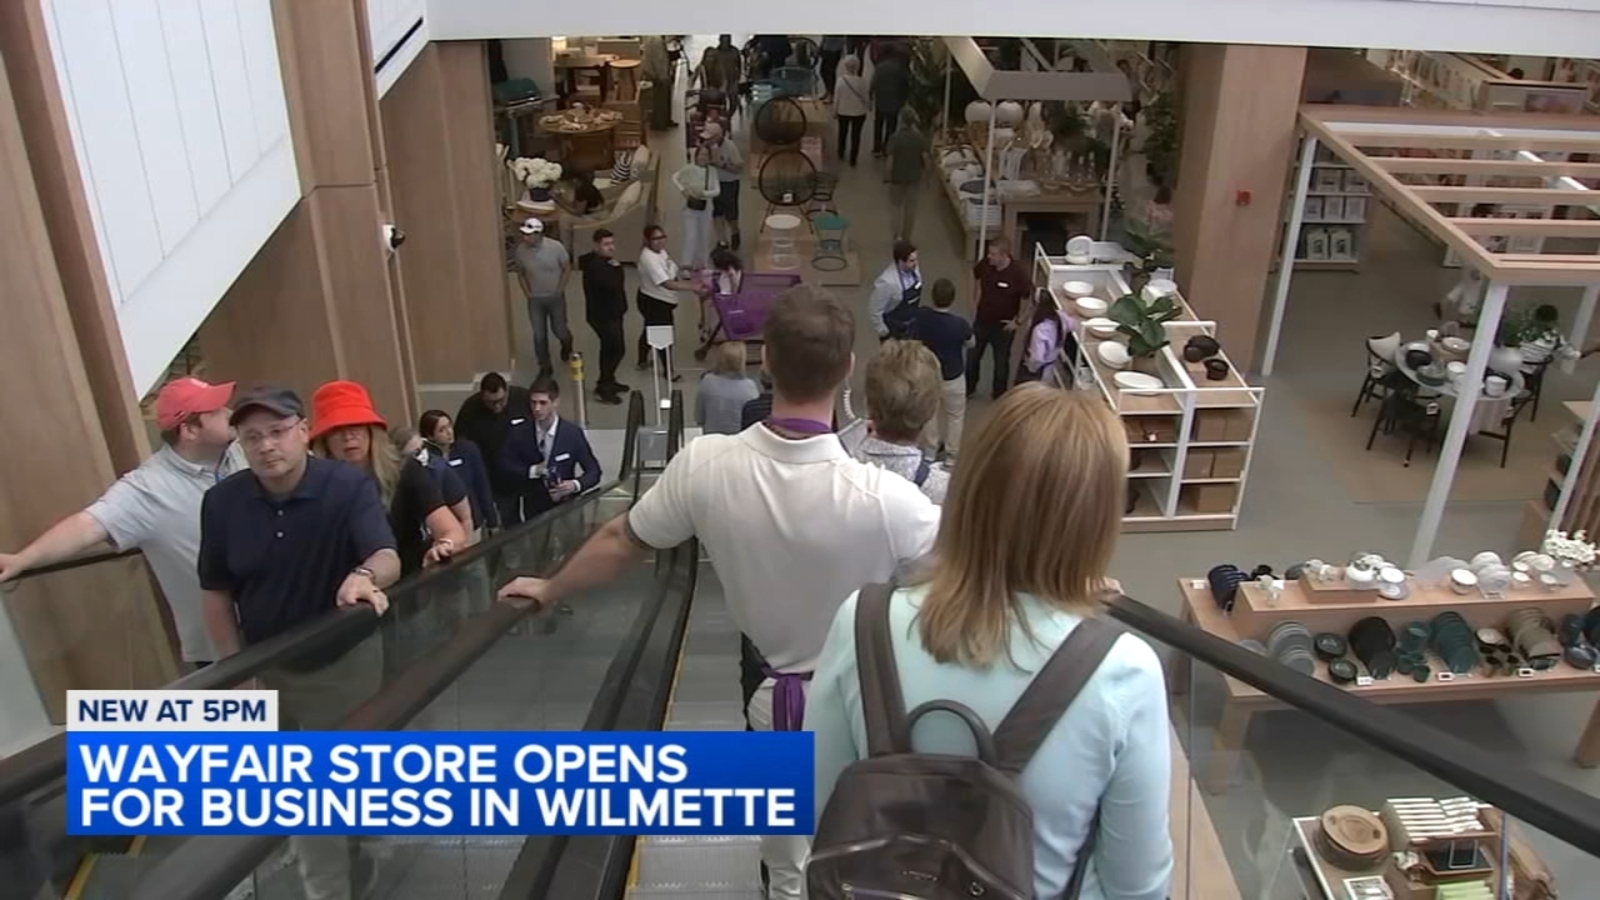 Wayfair’s 1st-ever brick-and-mortar store opens for business in Wilmette in Eden’s Plaza off I-94 [Video]